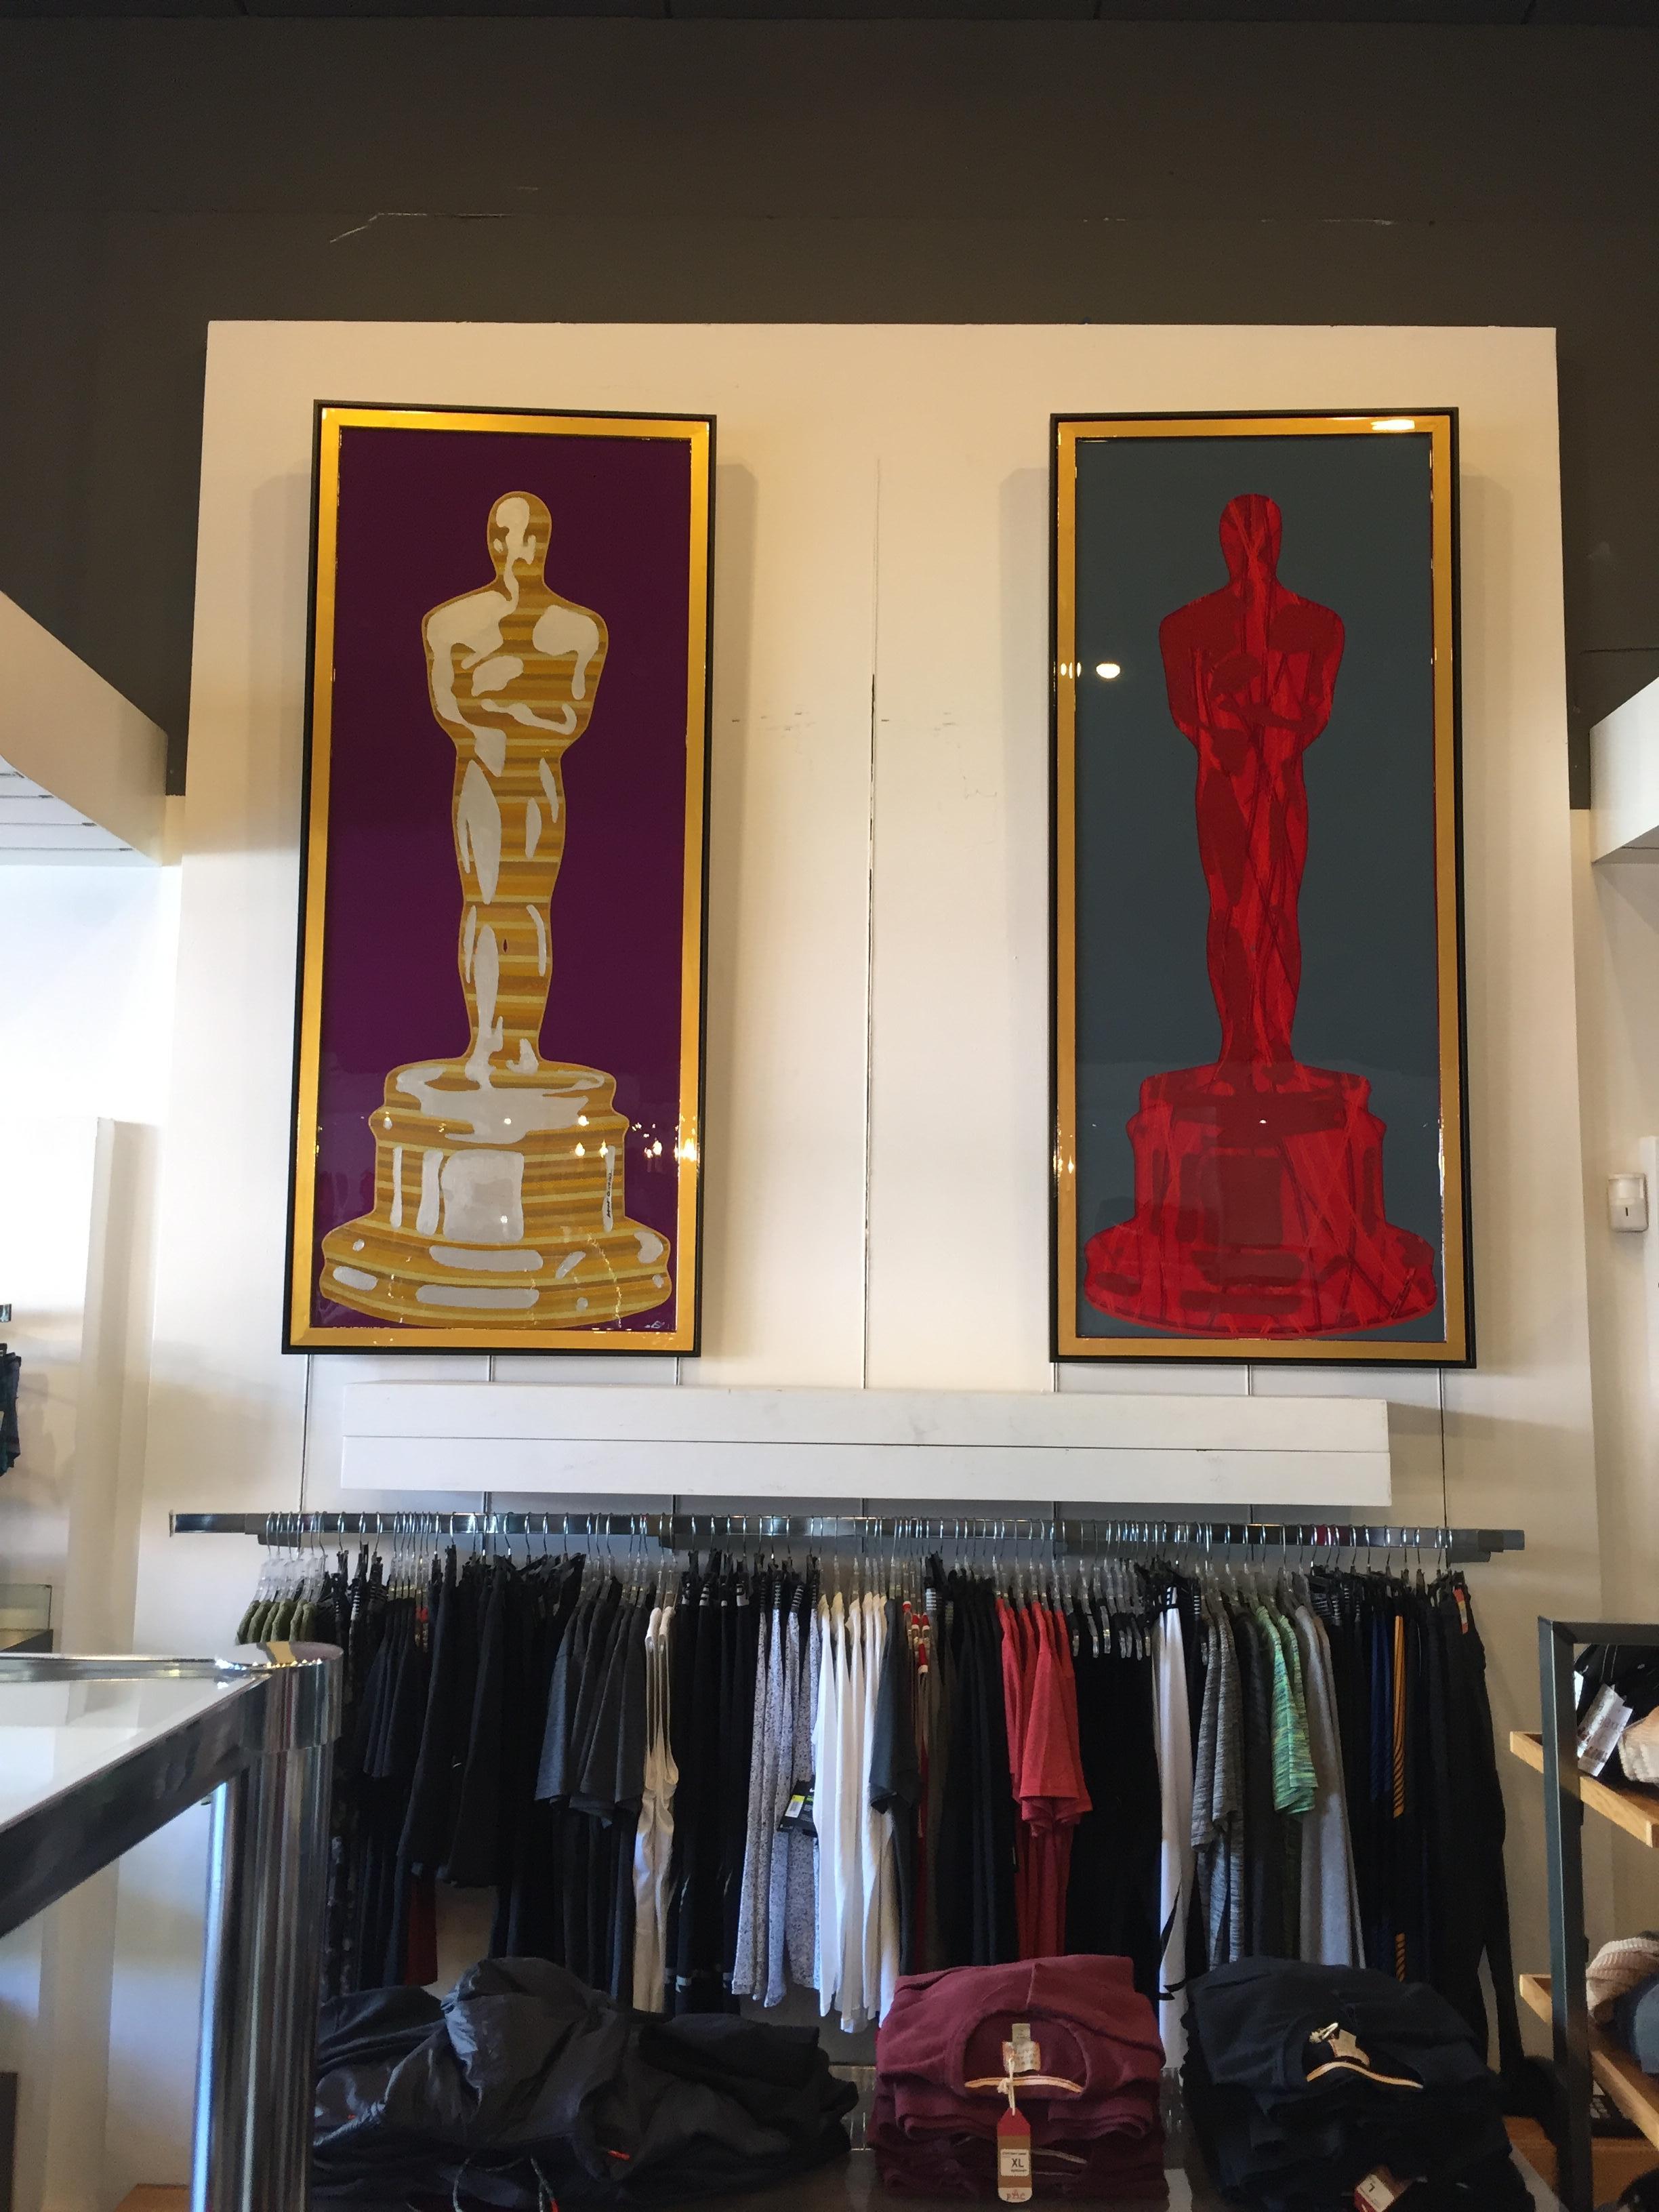 One of the limited and original Oscar Statue art series by Mauro Oliveira. Automobile vinyl tapes and acrylic paint over wood panel covered with resin. This one of a kind art reflects and represents the pain and suffering caused by various kinds of